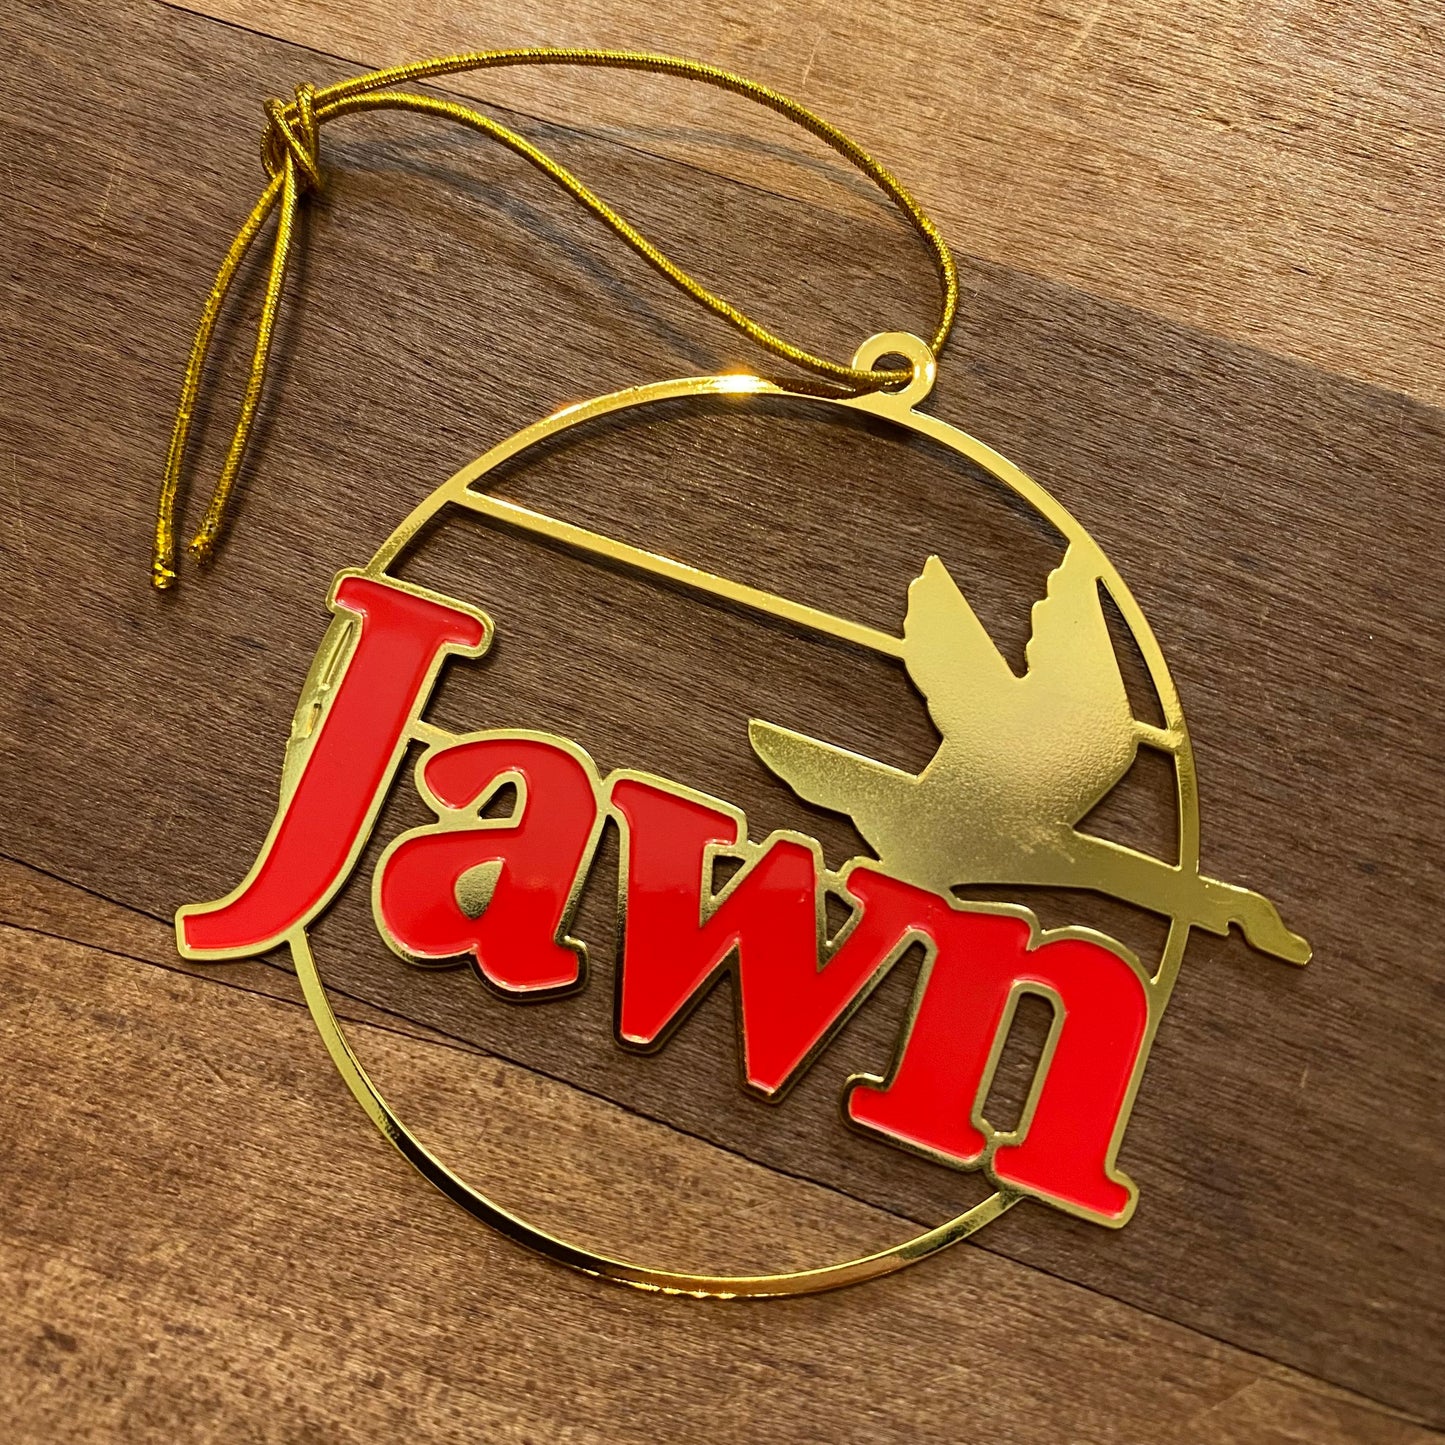 Gold and red South Fellini Jawn ornament with the word "jawn" and a silhouette of a flying bird.